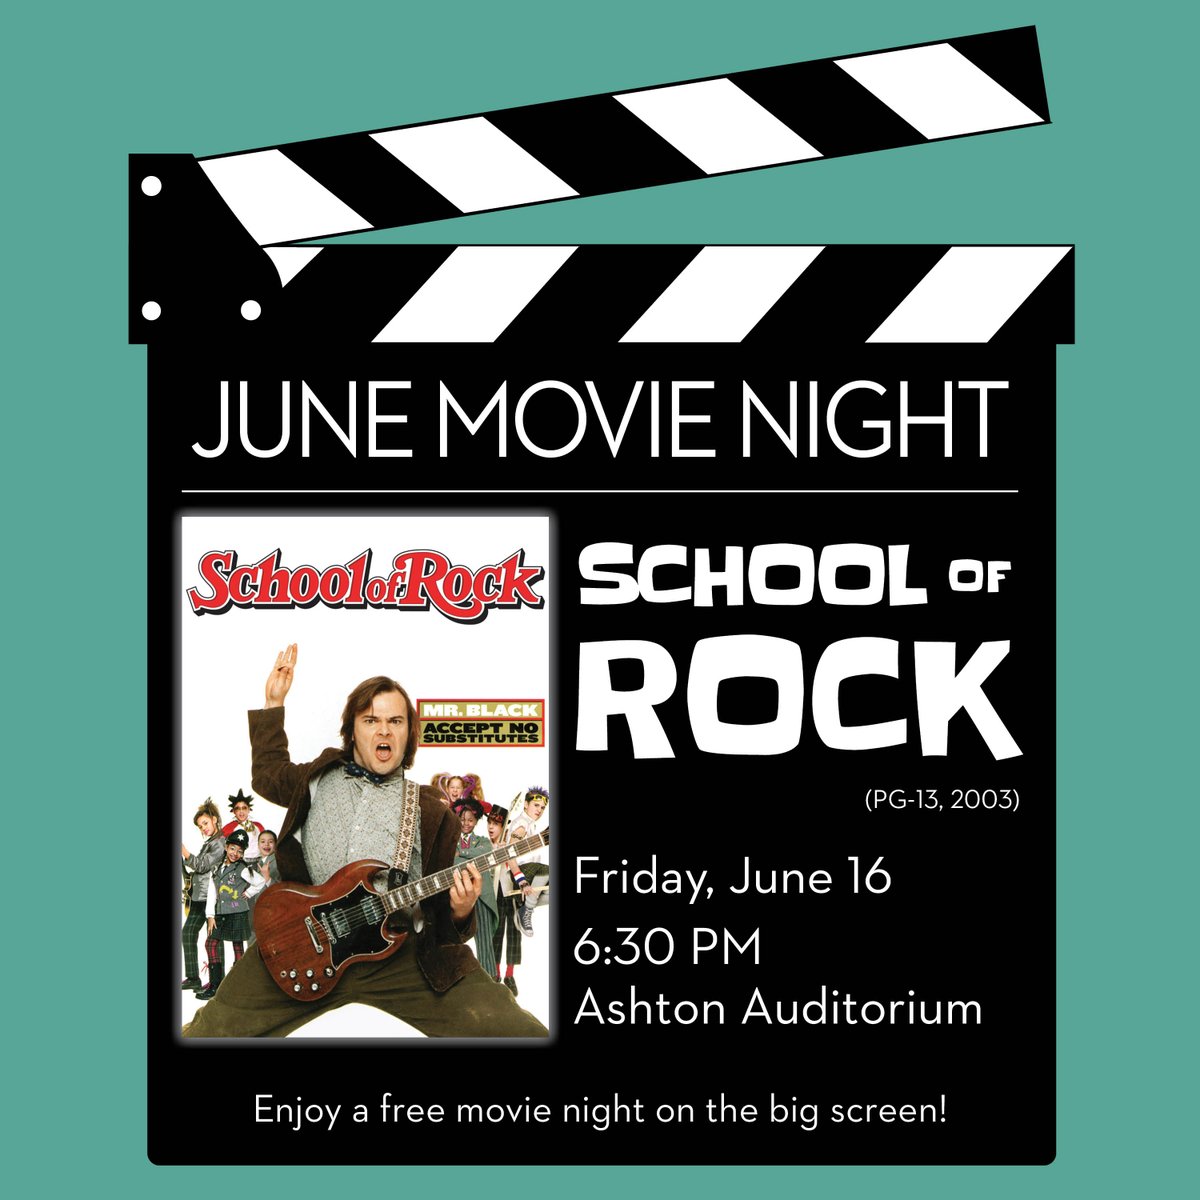 Stop by the library this week for these great programs! To see all events, visit oremlibrary.org/events-calendar. #OremLibrary #LibraryEvents #Games #Movies #Books #Storytime #MovieNight #Teens #Kids #FamilyEvents #AllAges